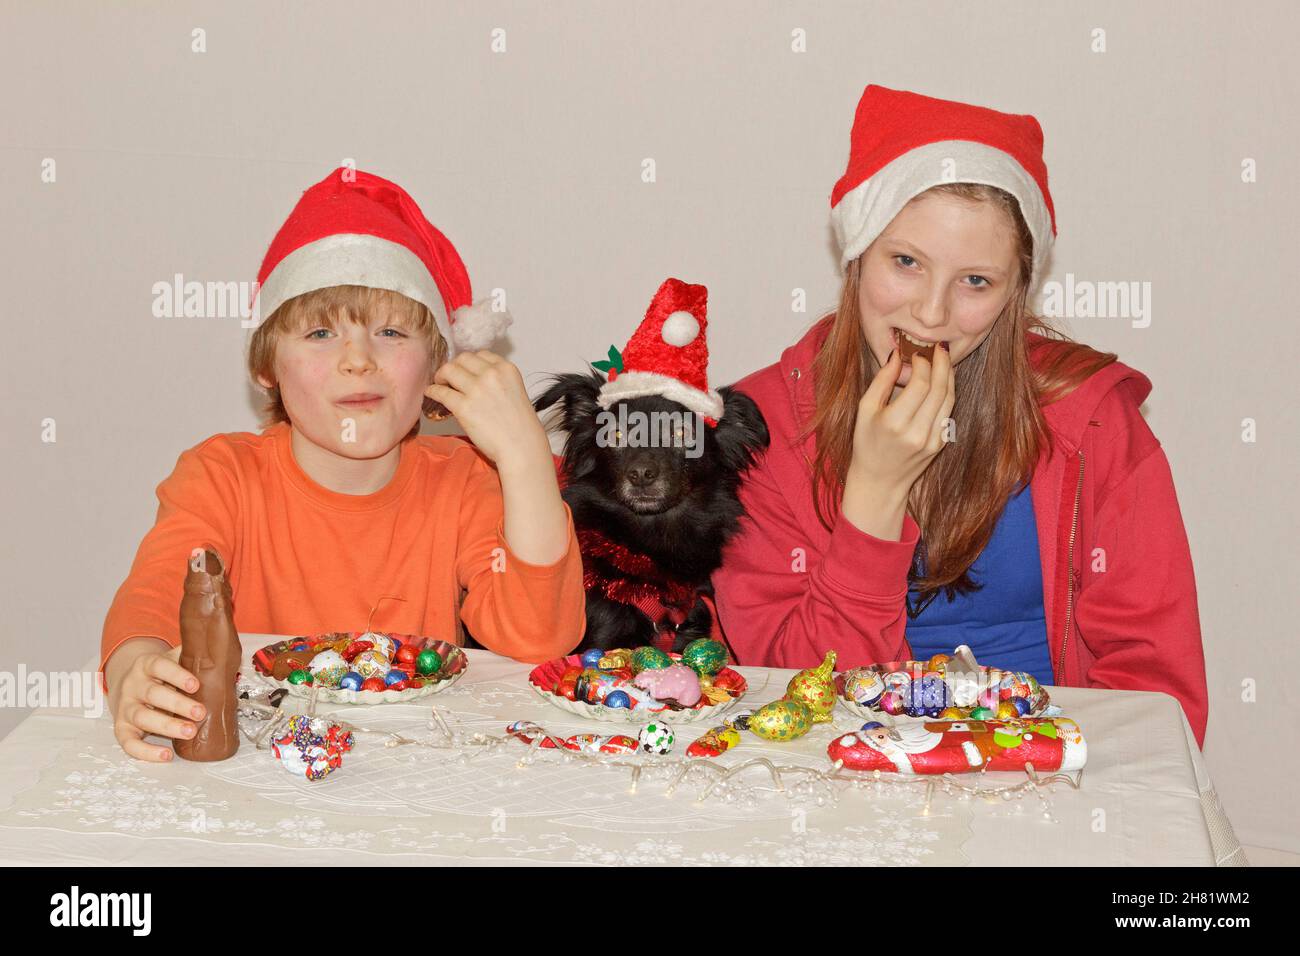 children and dog with Christmas hats and sweets Stock Photo